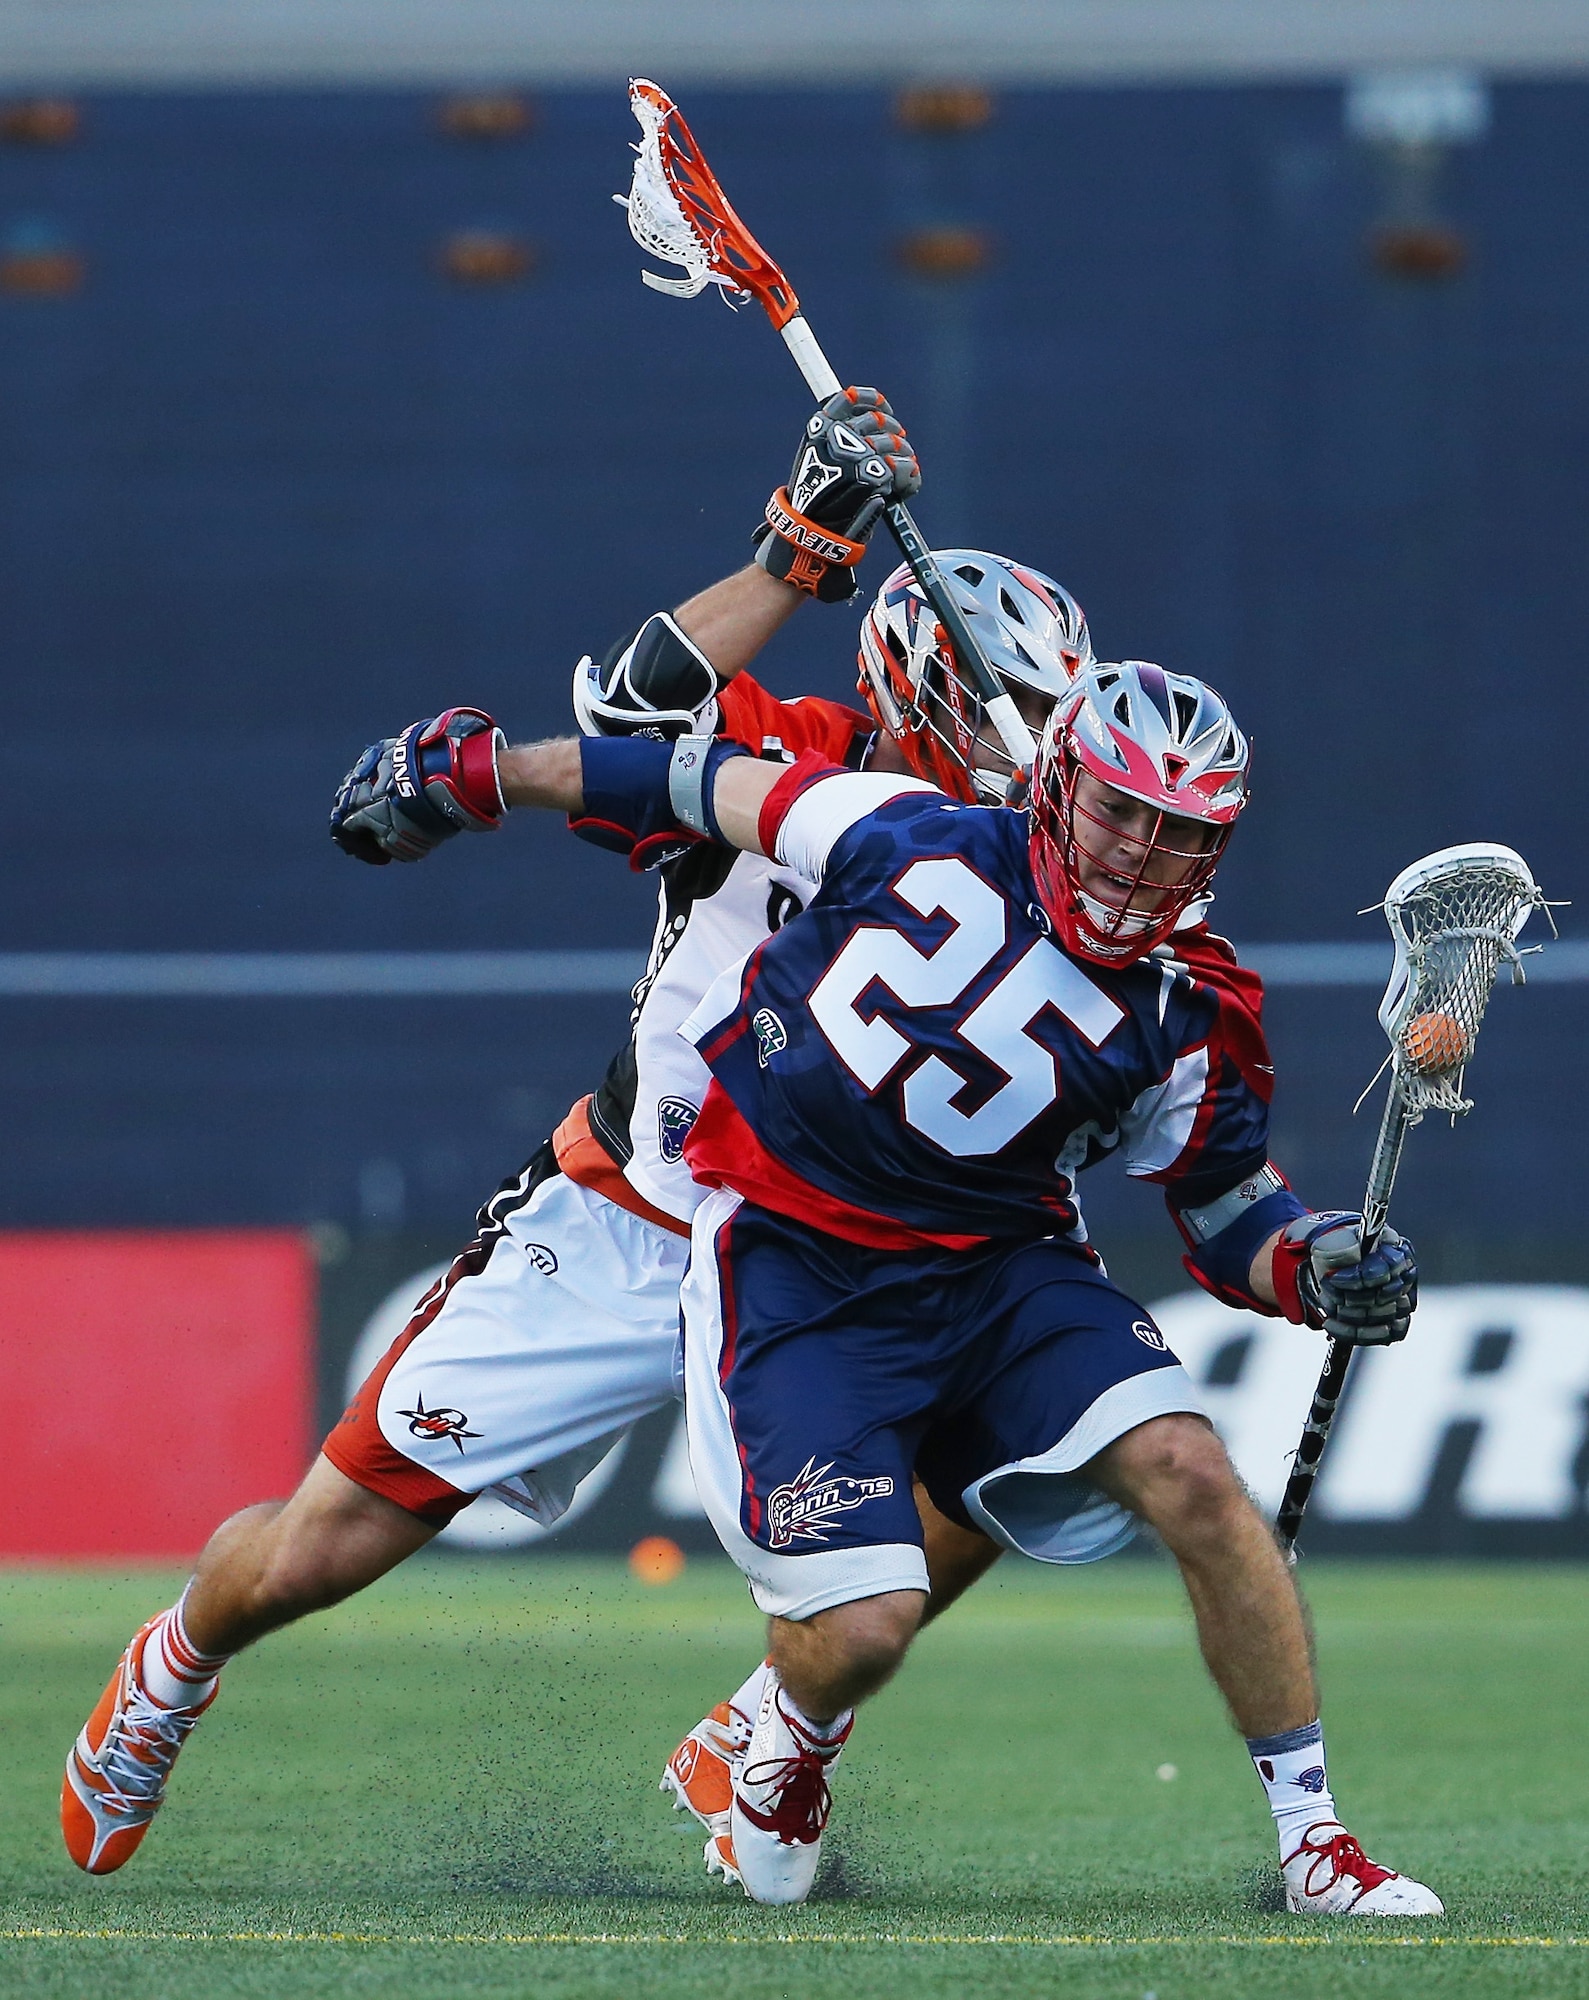 Erik Smith (25) battles a Denver Outlaws player during a Major League Lacrosse game at Gillette Stadium in Foxboro, Mass., April 12. Smith, who is a second lieutenant assigned to the C3I and Networks Directorate at Hanscom Air Force Base, was drafted last year by the Boston Cannons professional lacrosse team in the MLL draft. (Courtesy photo)